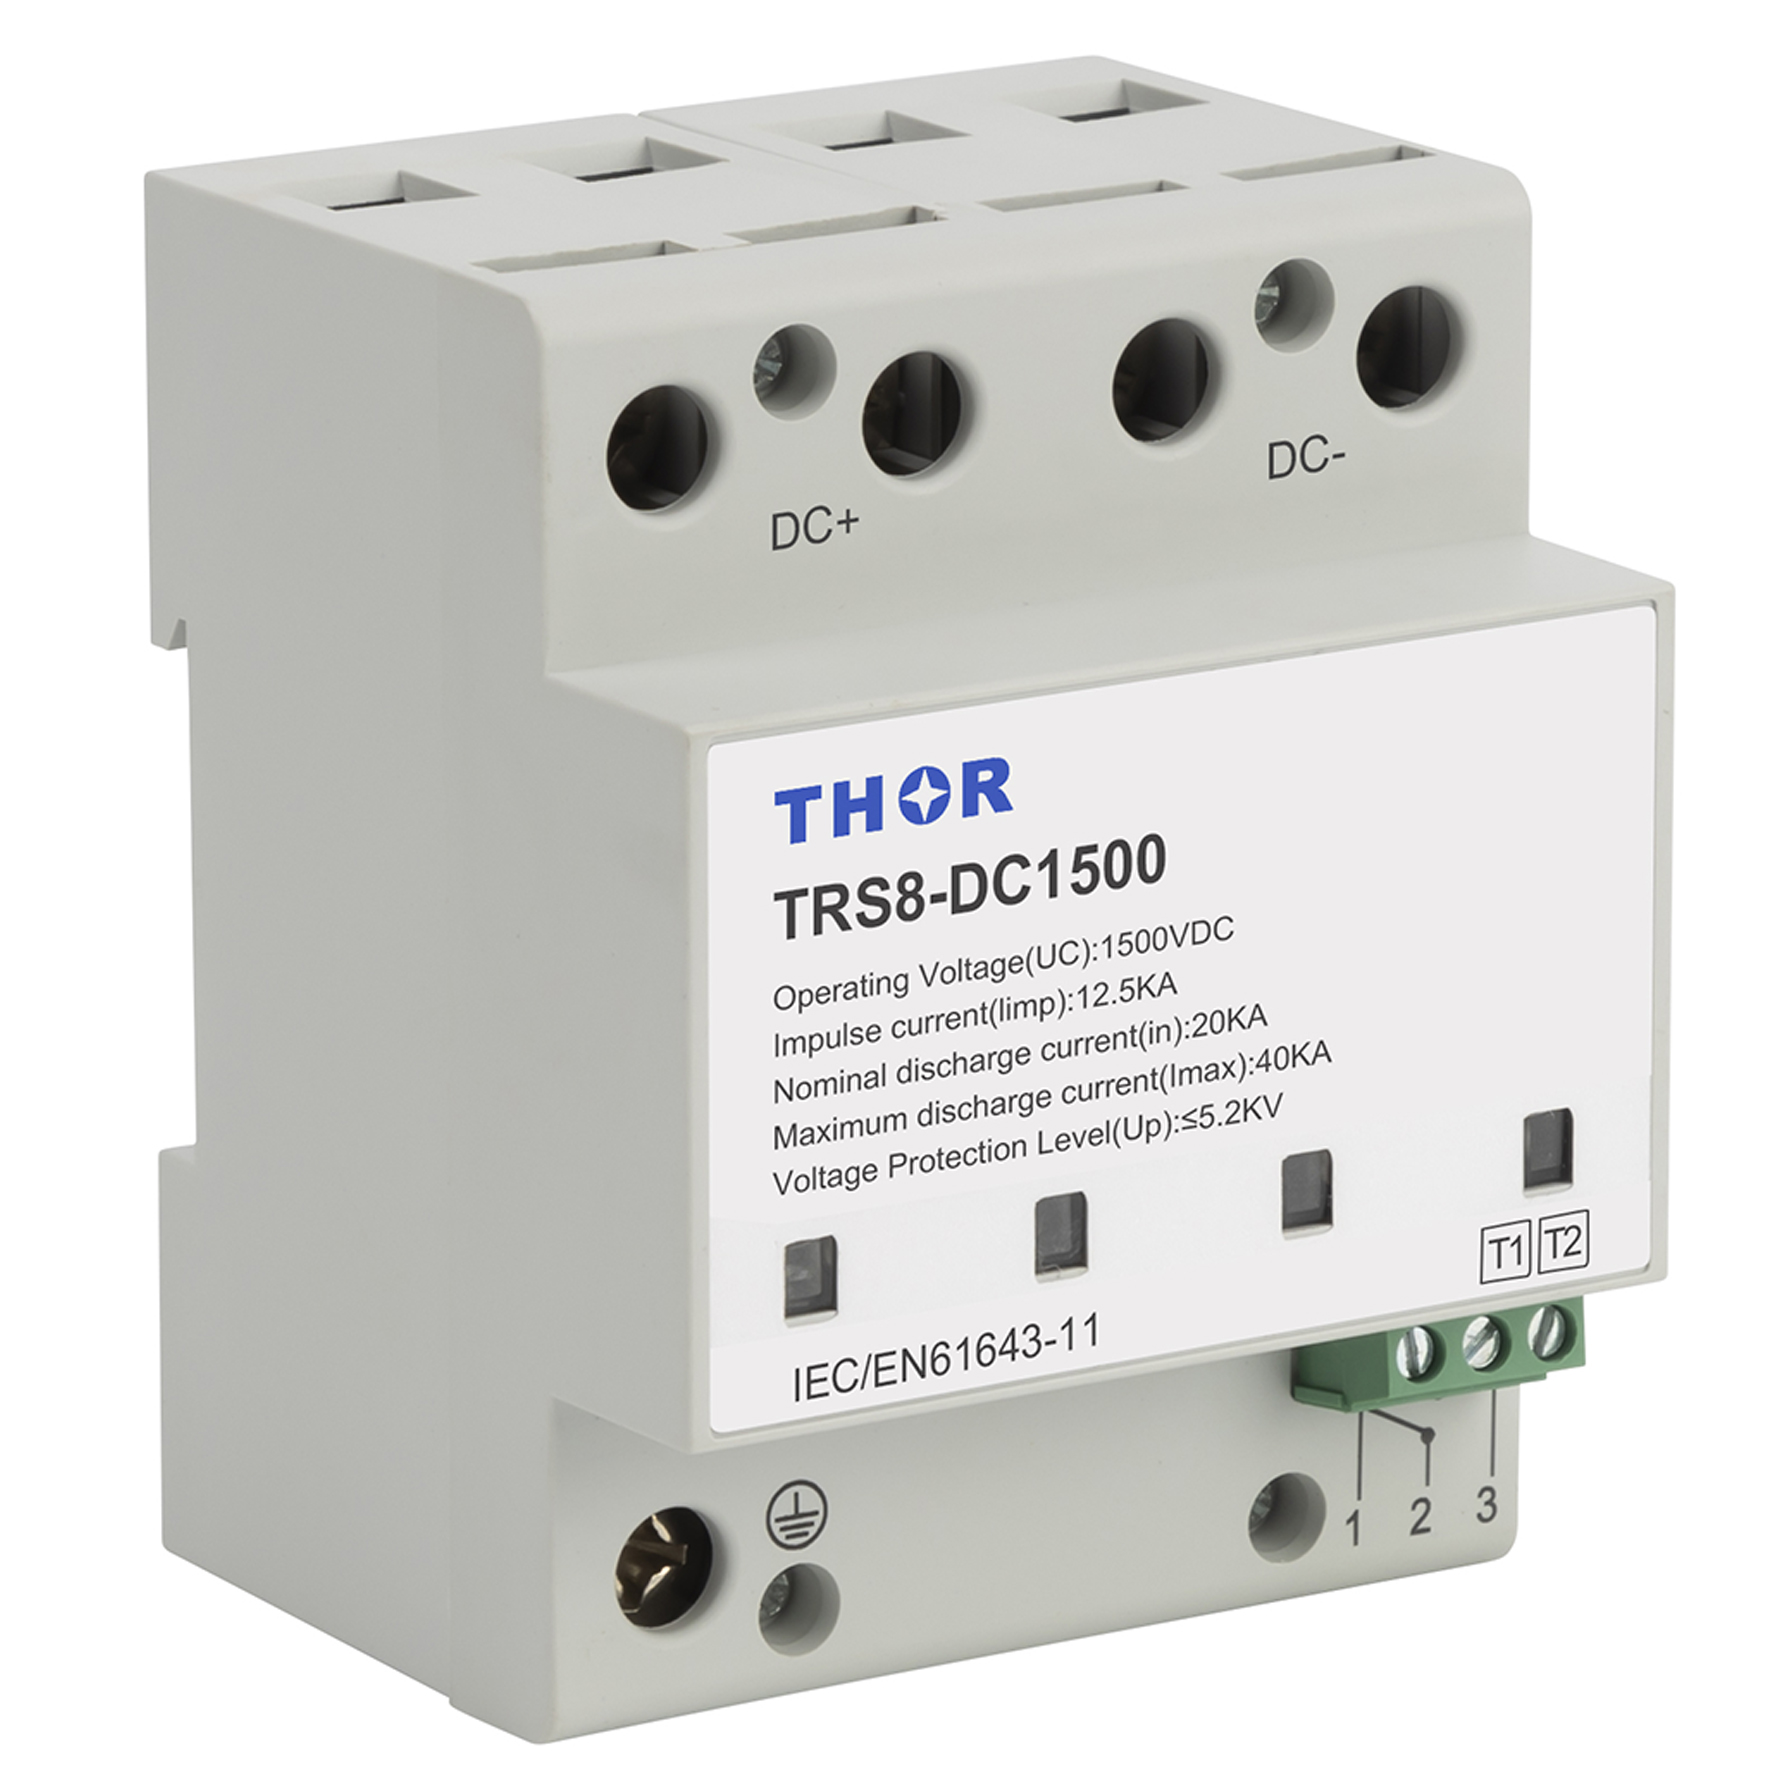 Type 1+ 2 DC1500V photovoltaic surge protection device TRS8 series